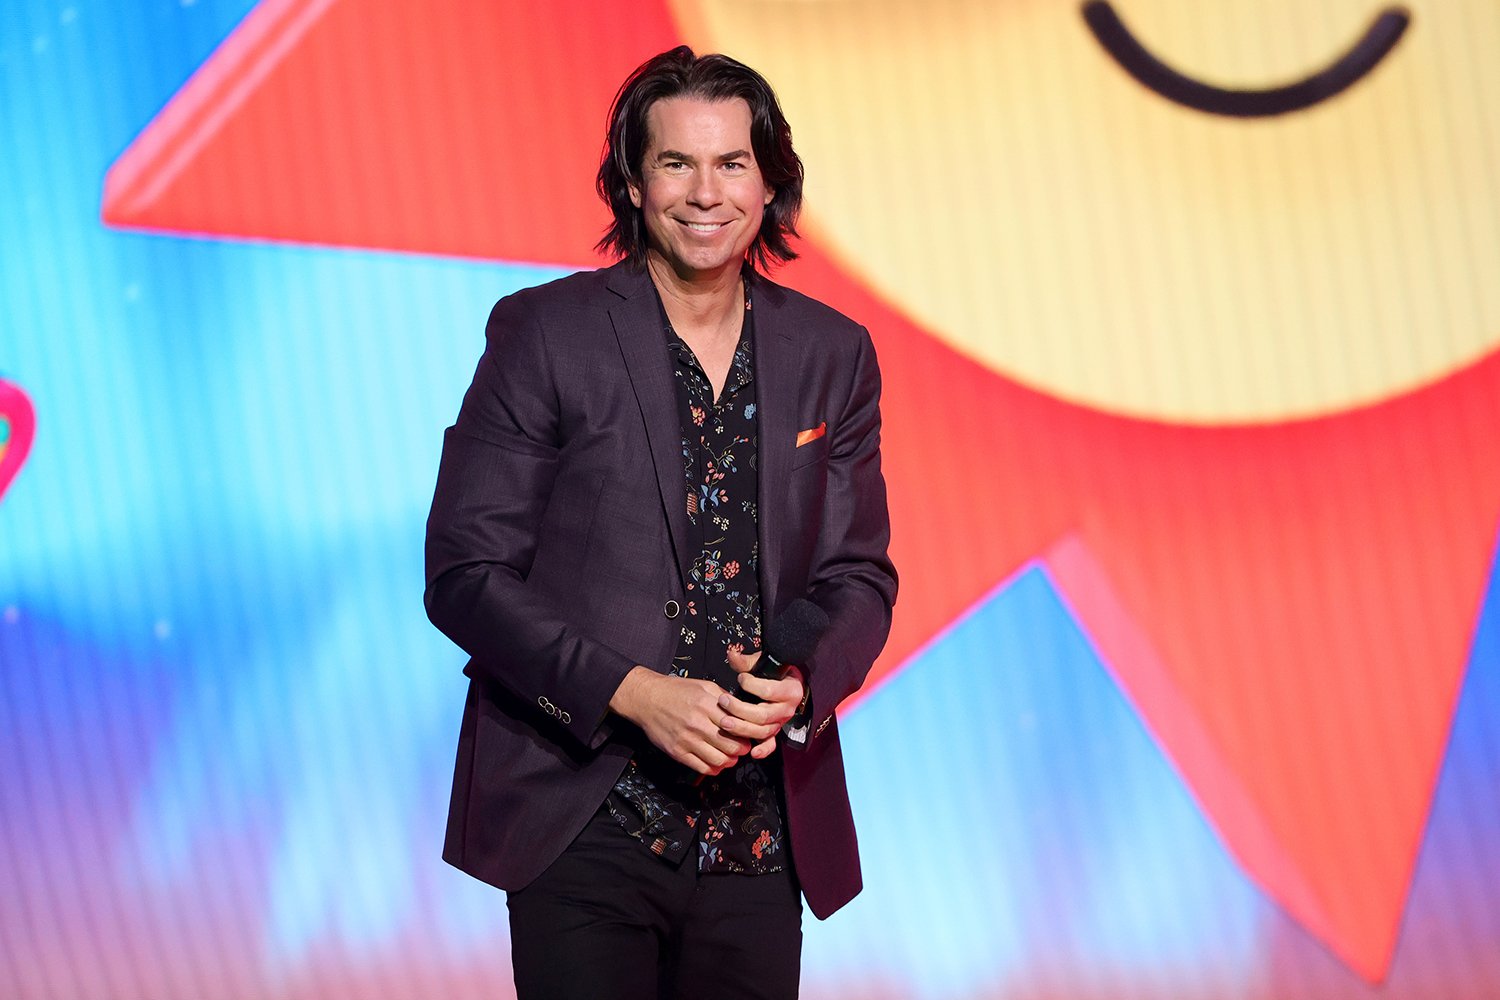 'iCarly' star Jerry Trainor, who plays Spencer on the series, at the Nickelodeon Kids' Choice Awards in March 2021